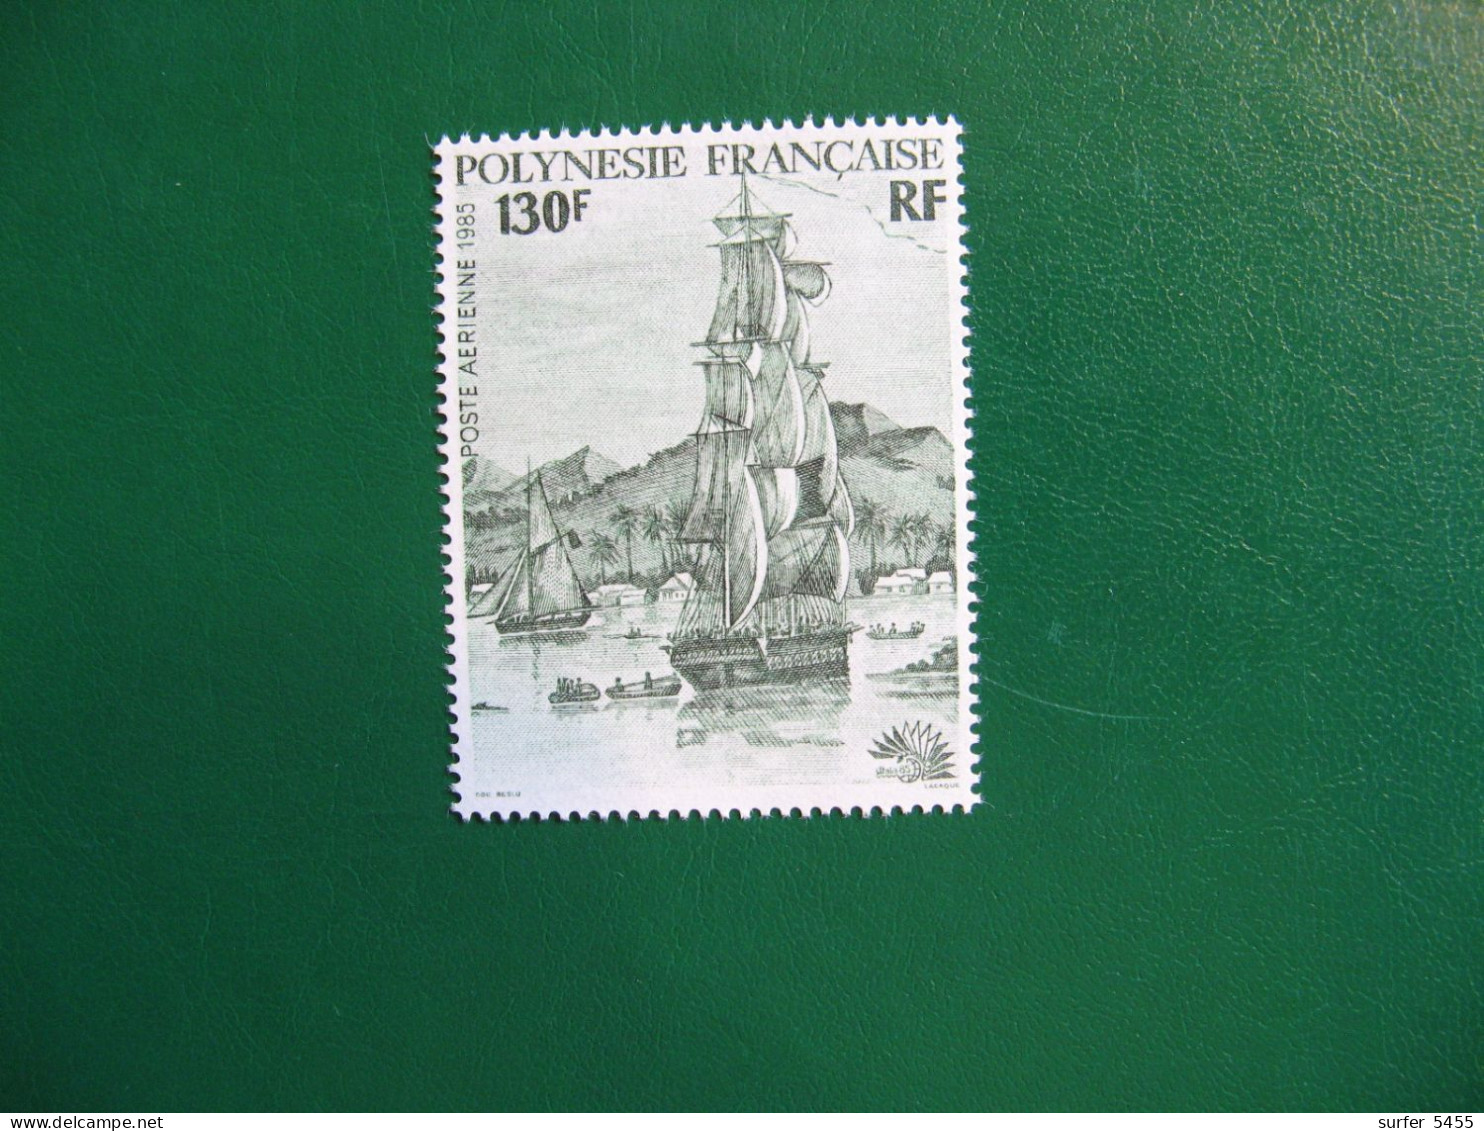 P0LYNESIE PO AERIENNE N° 189 TIMBRE NEUF ** LUXE - MNH - SERIE COMPLETE - FACIALE 1,09 EURO - Ungebraucht